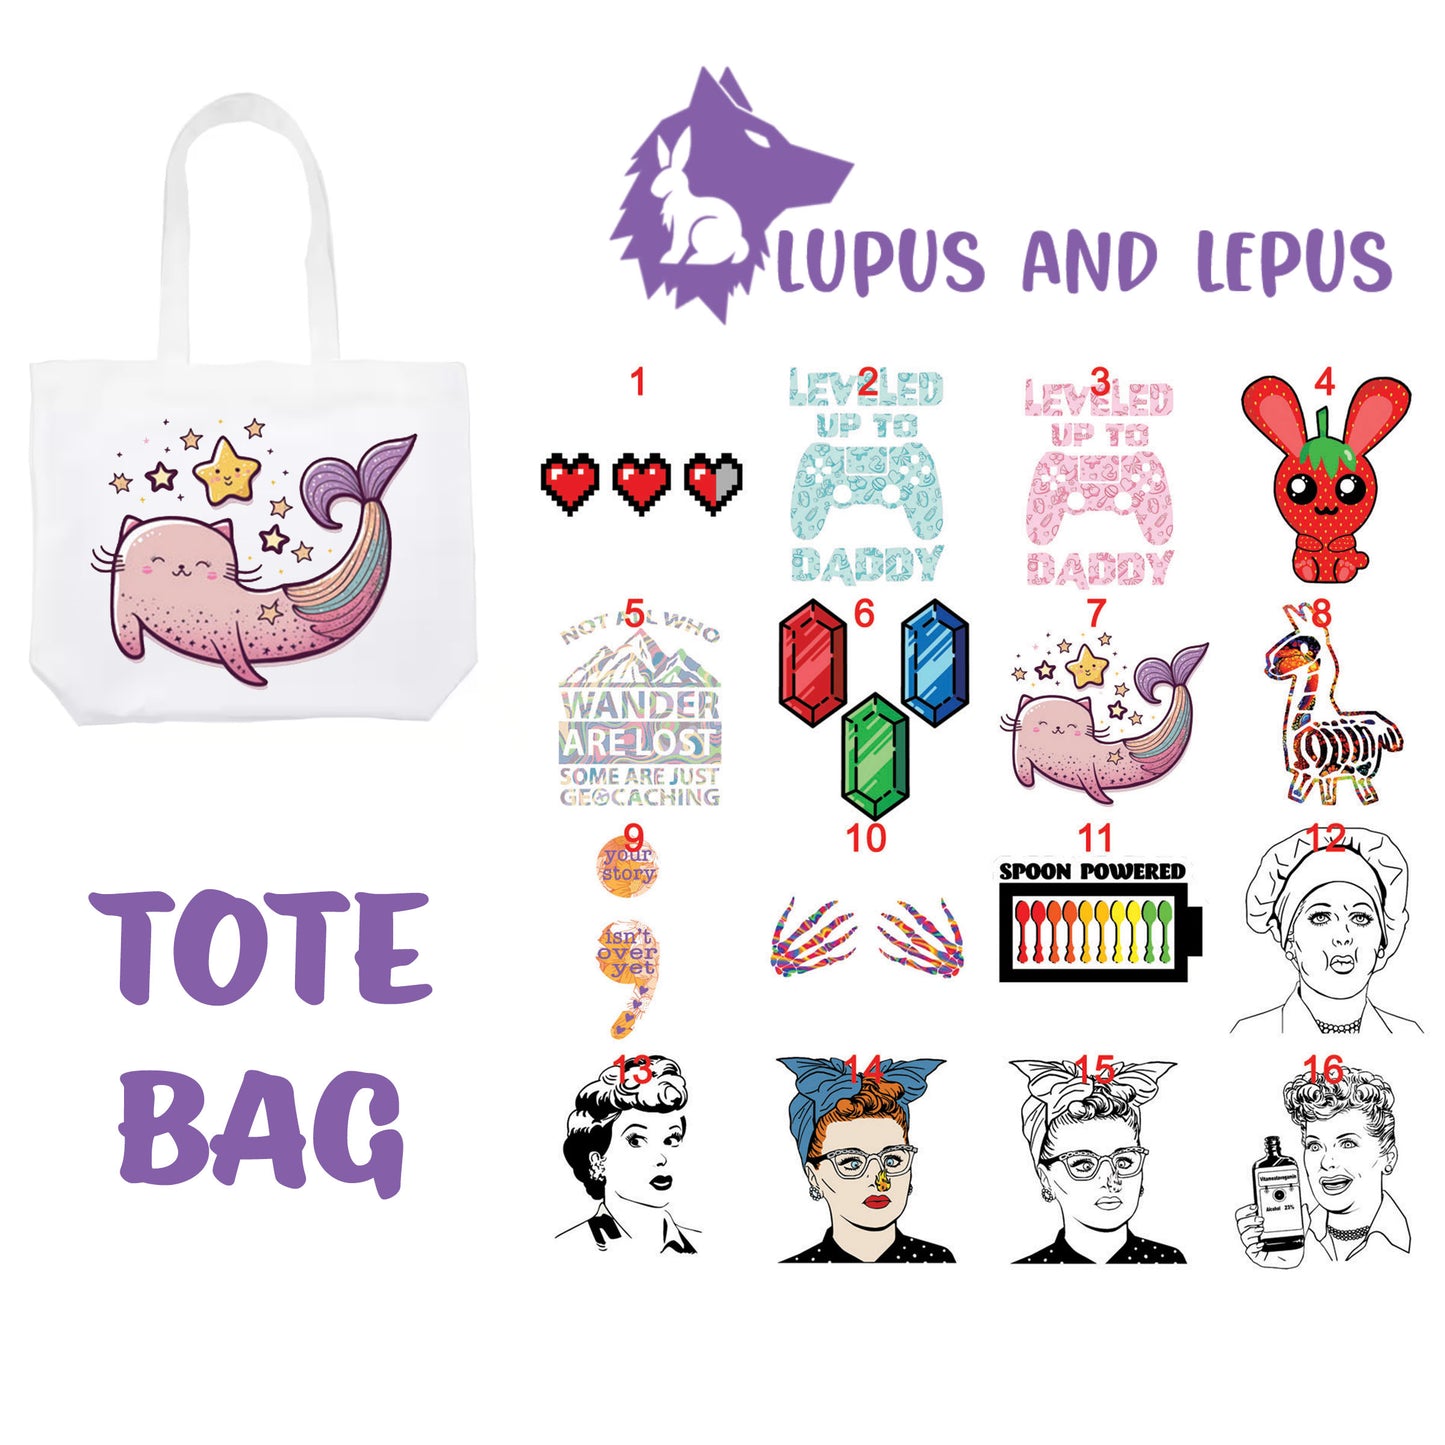 TOTE BAG 6 - My Art tote bag, dragons, colorful, bunnies, lucy, I love lucy, gamer, gamer dad, leveled up to daddy, rupee, gem, semi colon, zelda, mermaid cag